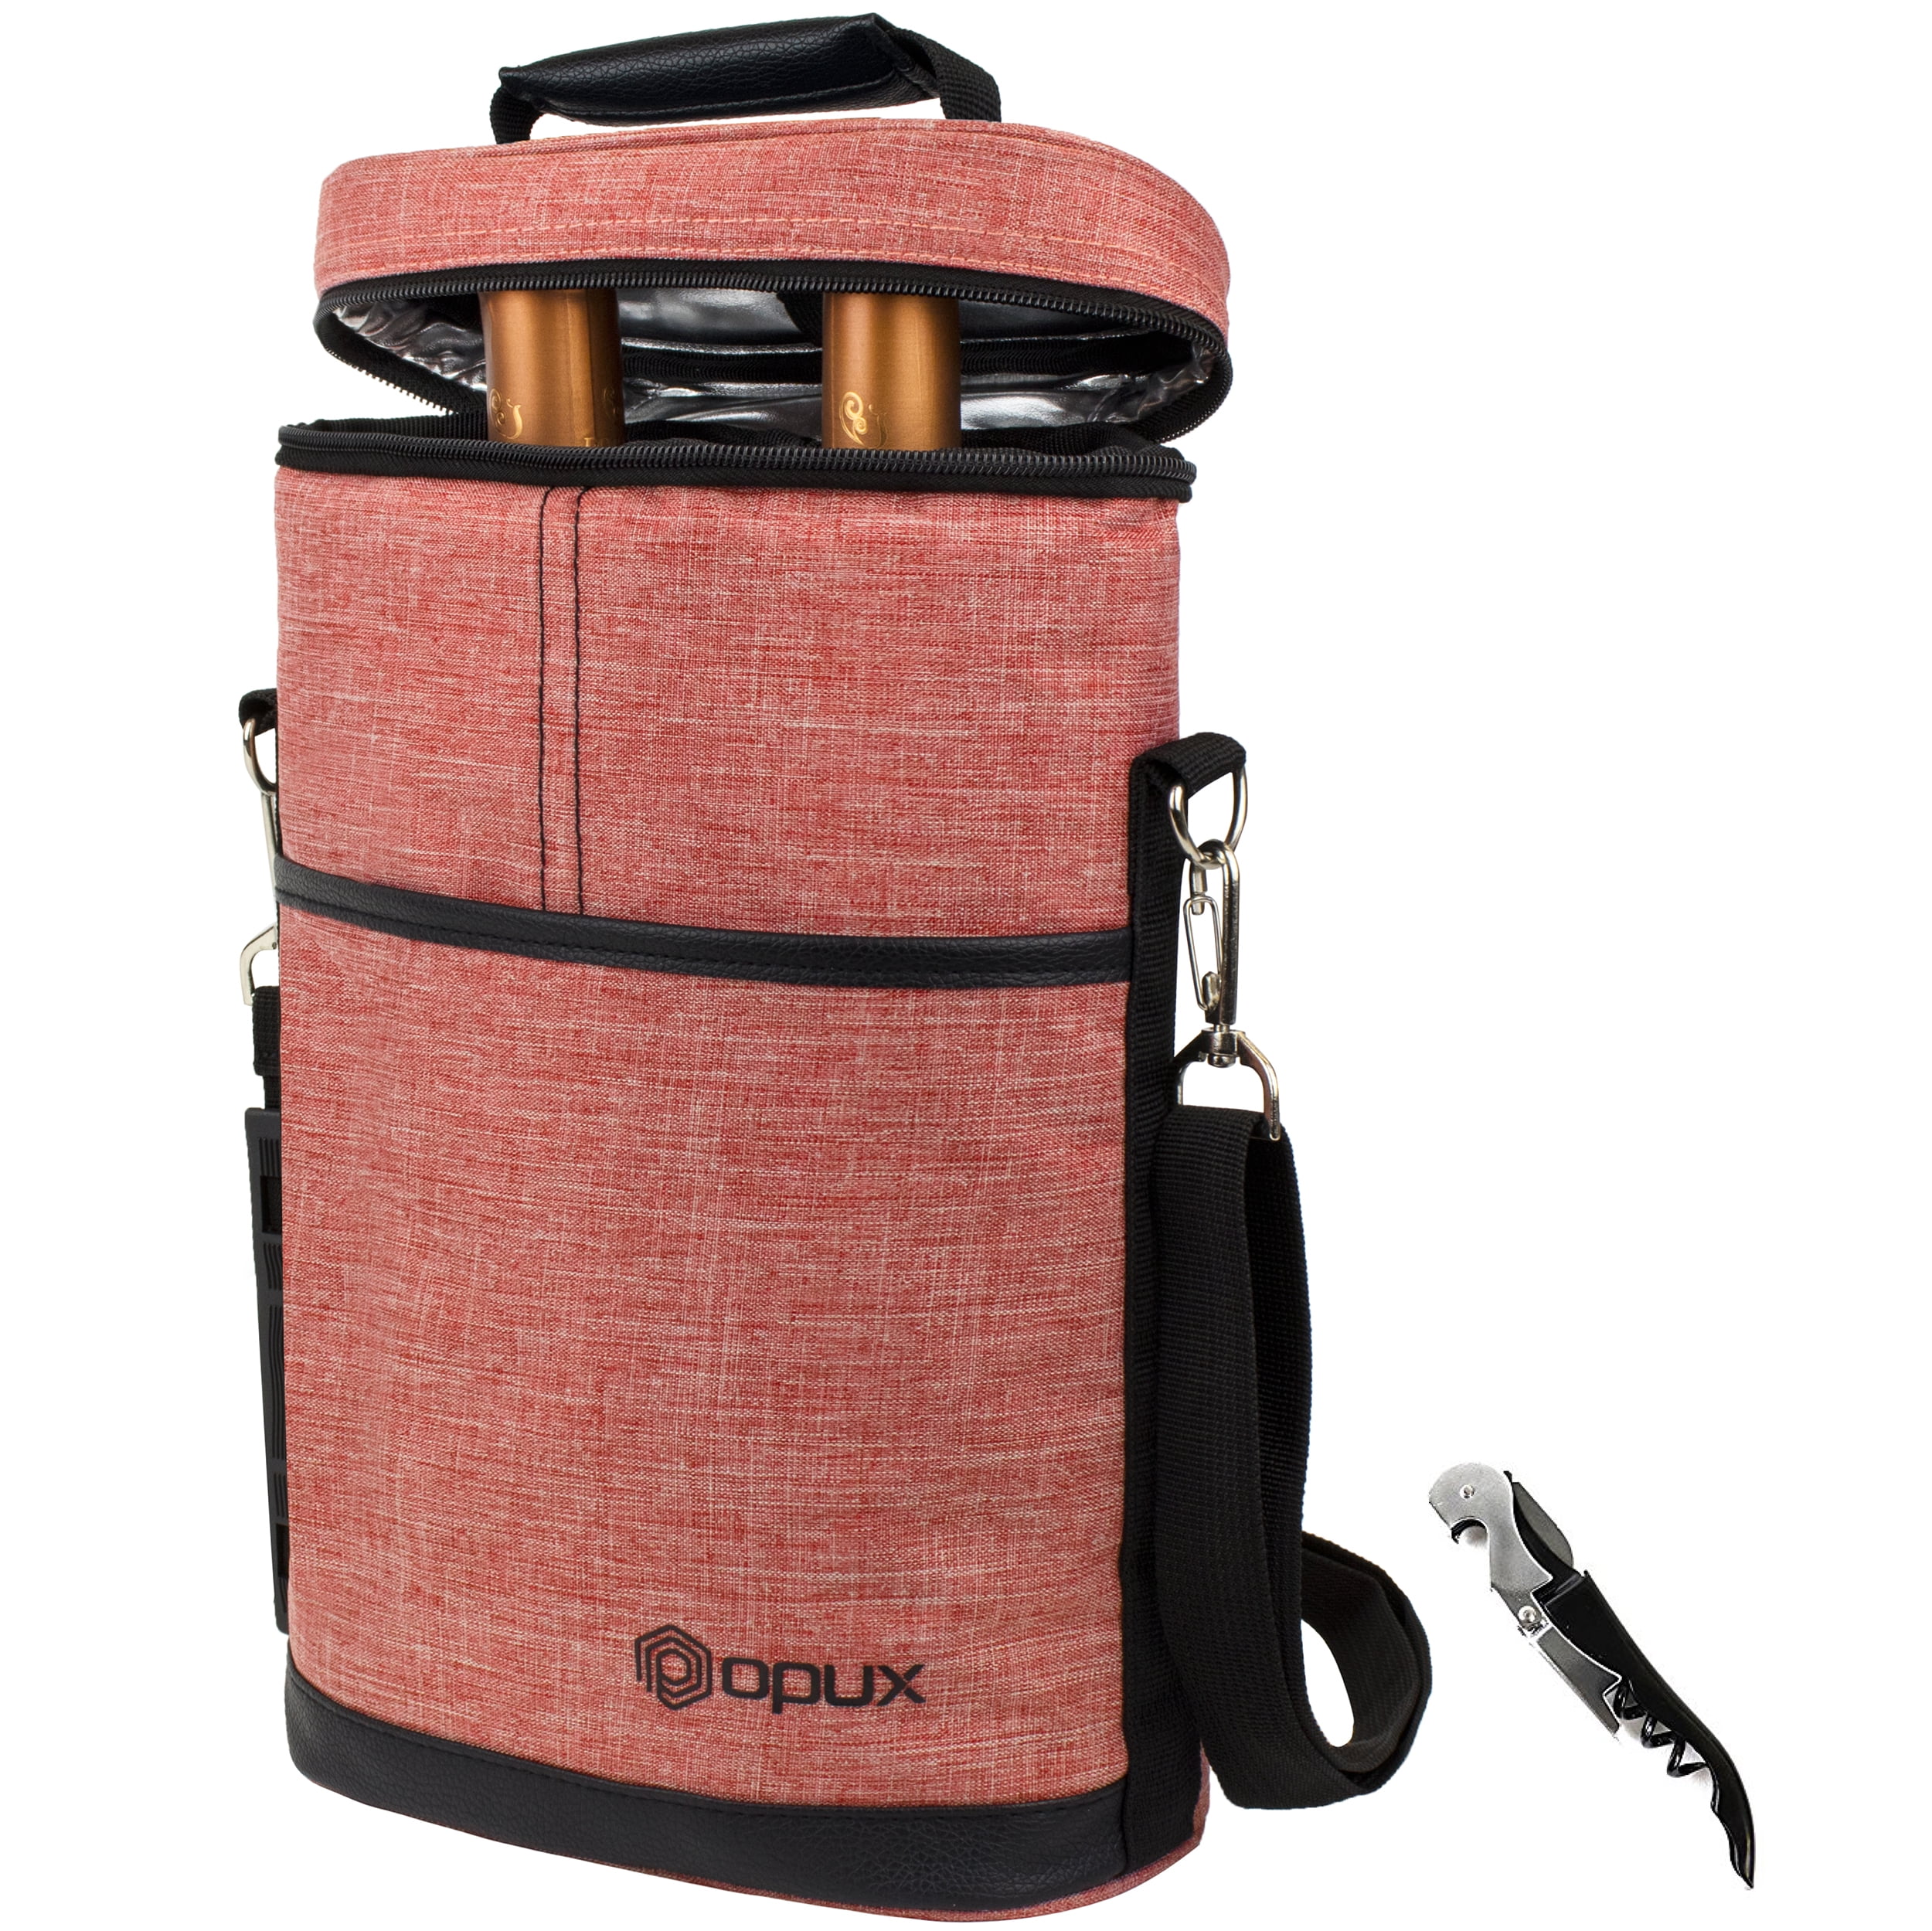 OPUX 2 Bottle Wine Carrier Tote, Insulated Leakproof Wine Cooler